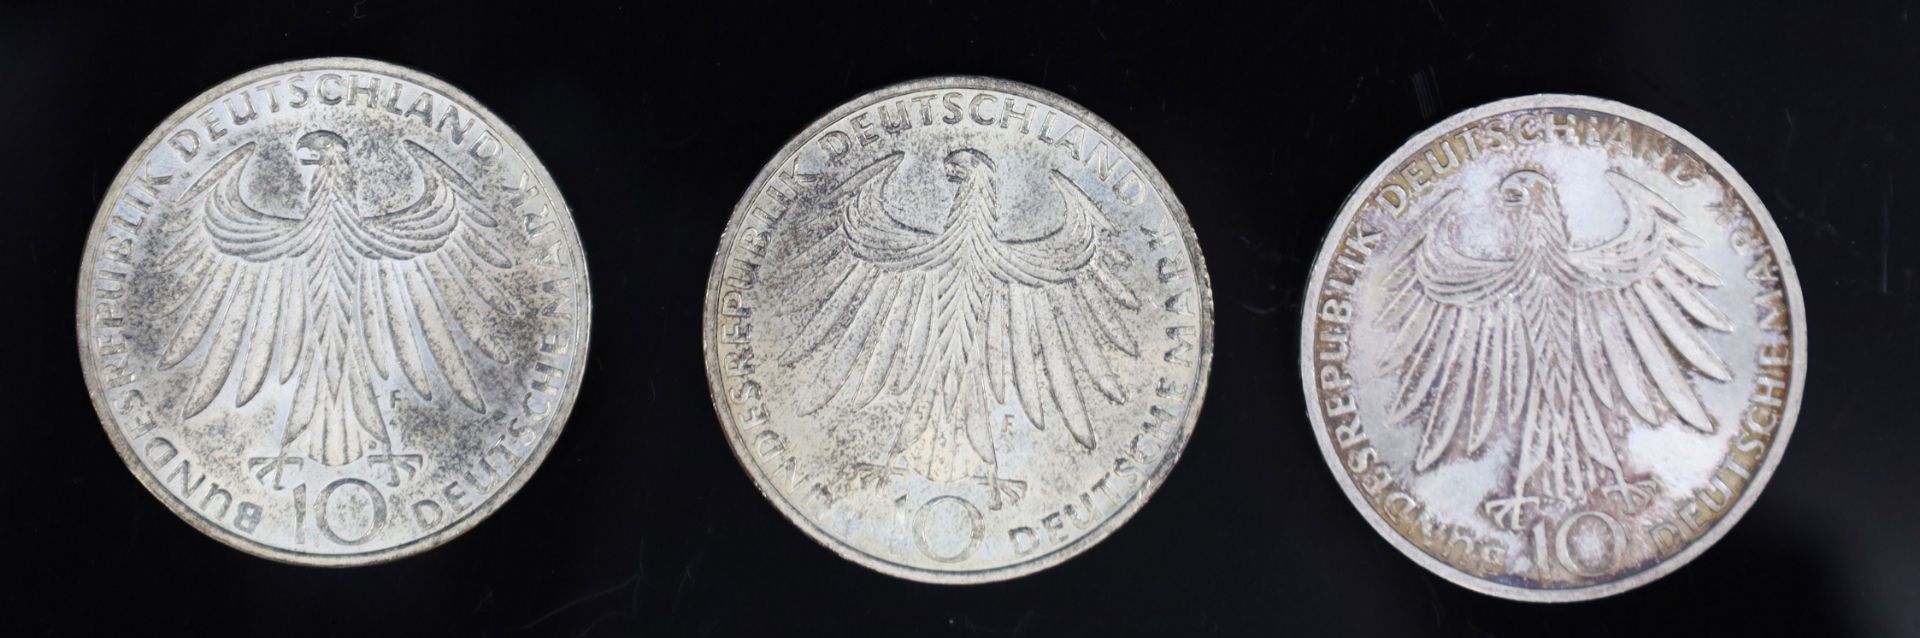 9x ‘10 German Marks’. Munich Olympics. Silver coins. - Image 3 of 7